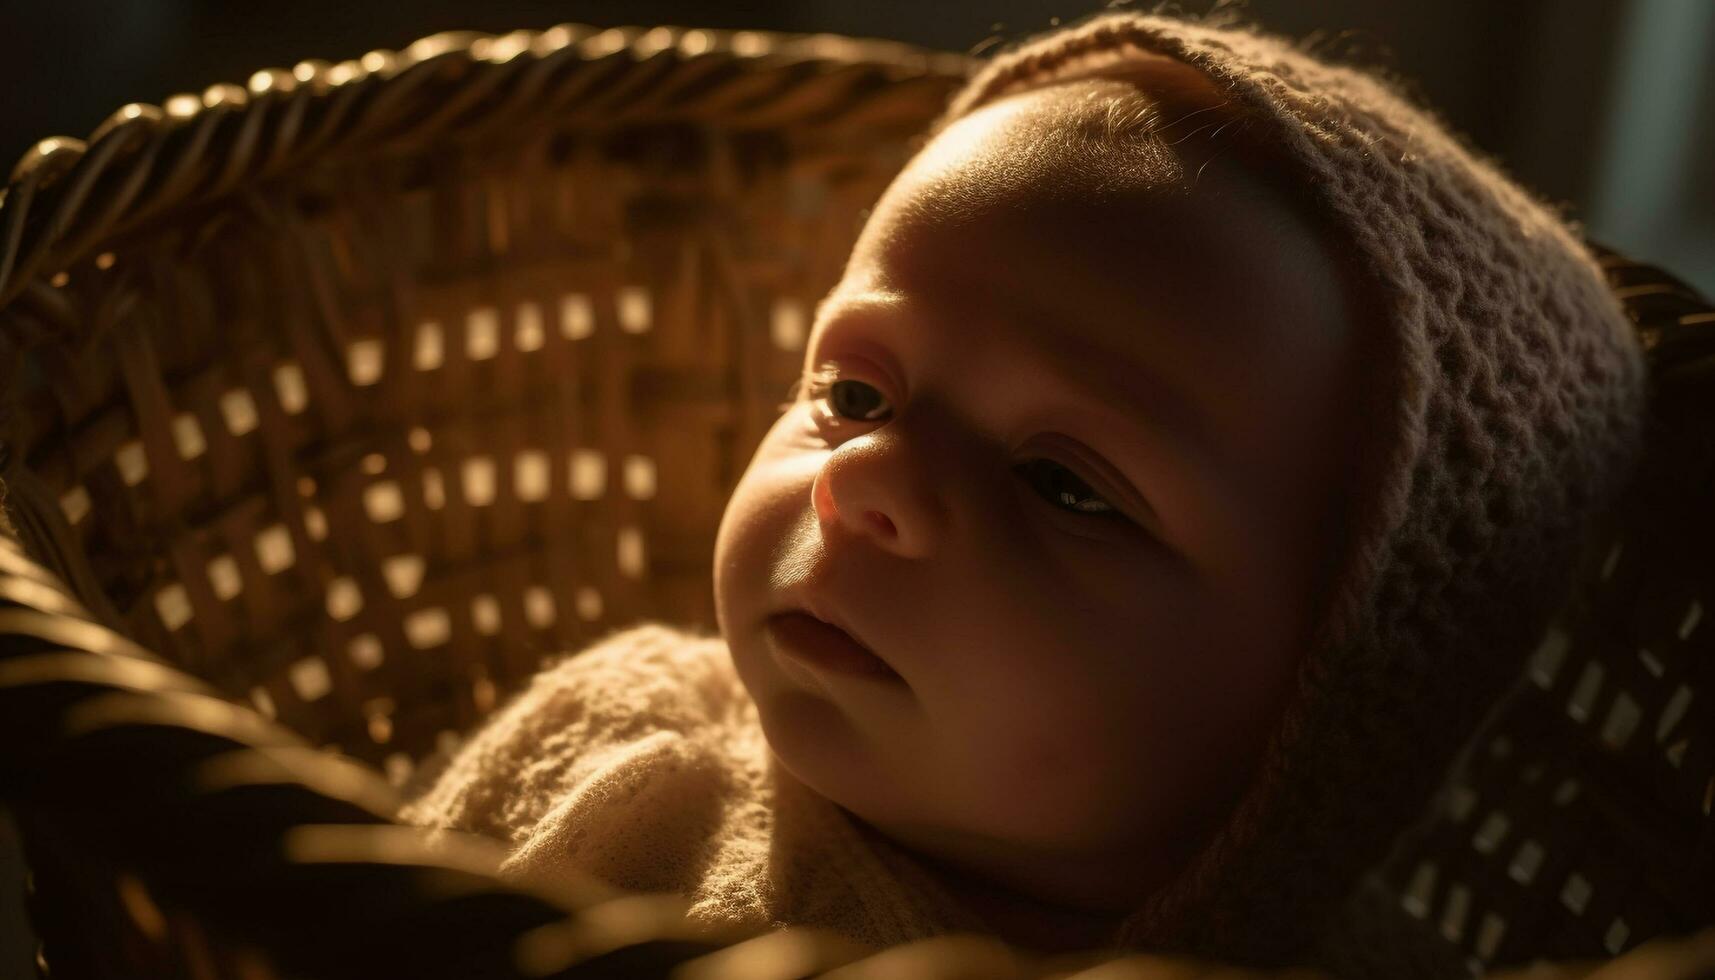 Cute baby boy smiling in portrait, playing outdoors with basket generated by AI photo